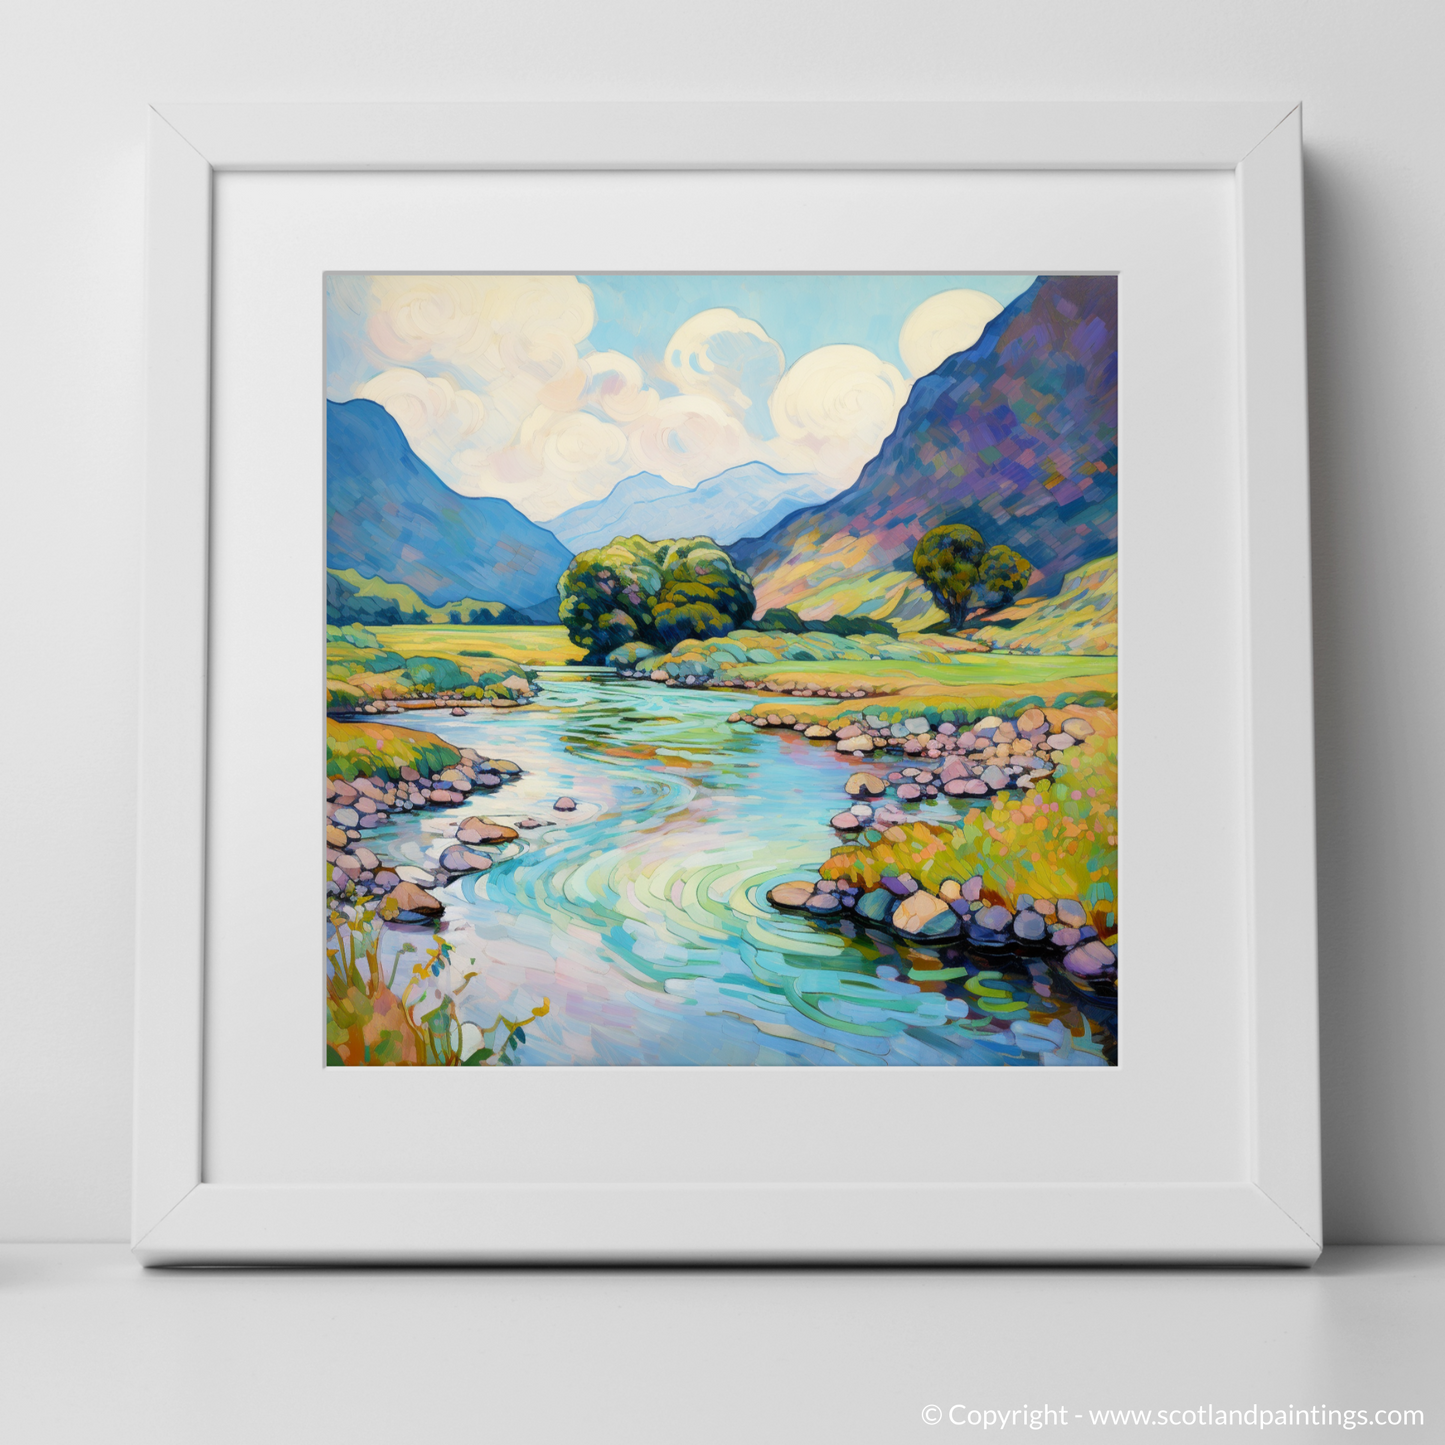 Art Print of River Coe, Glencoe, Highlands in summer with a white frame